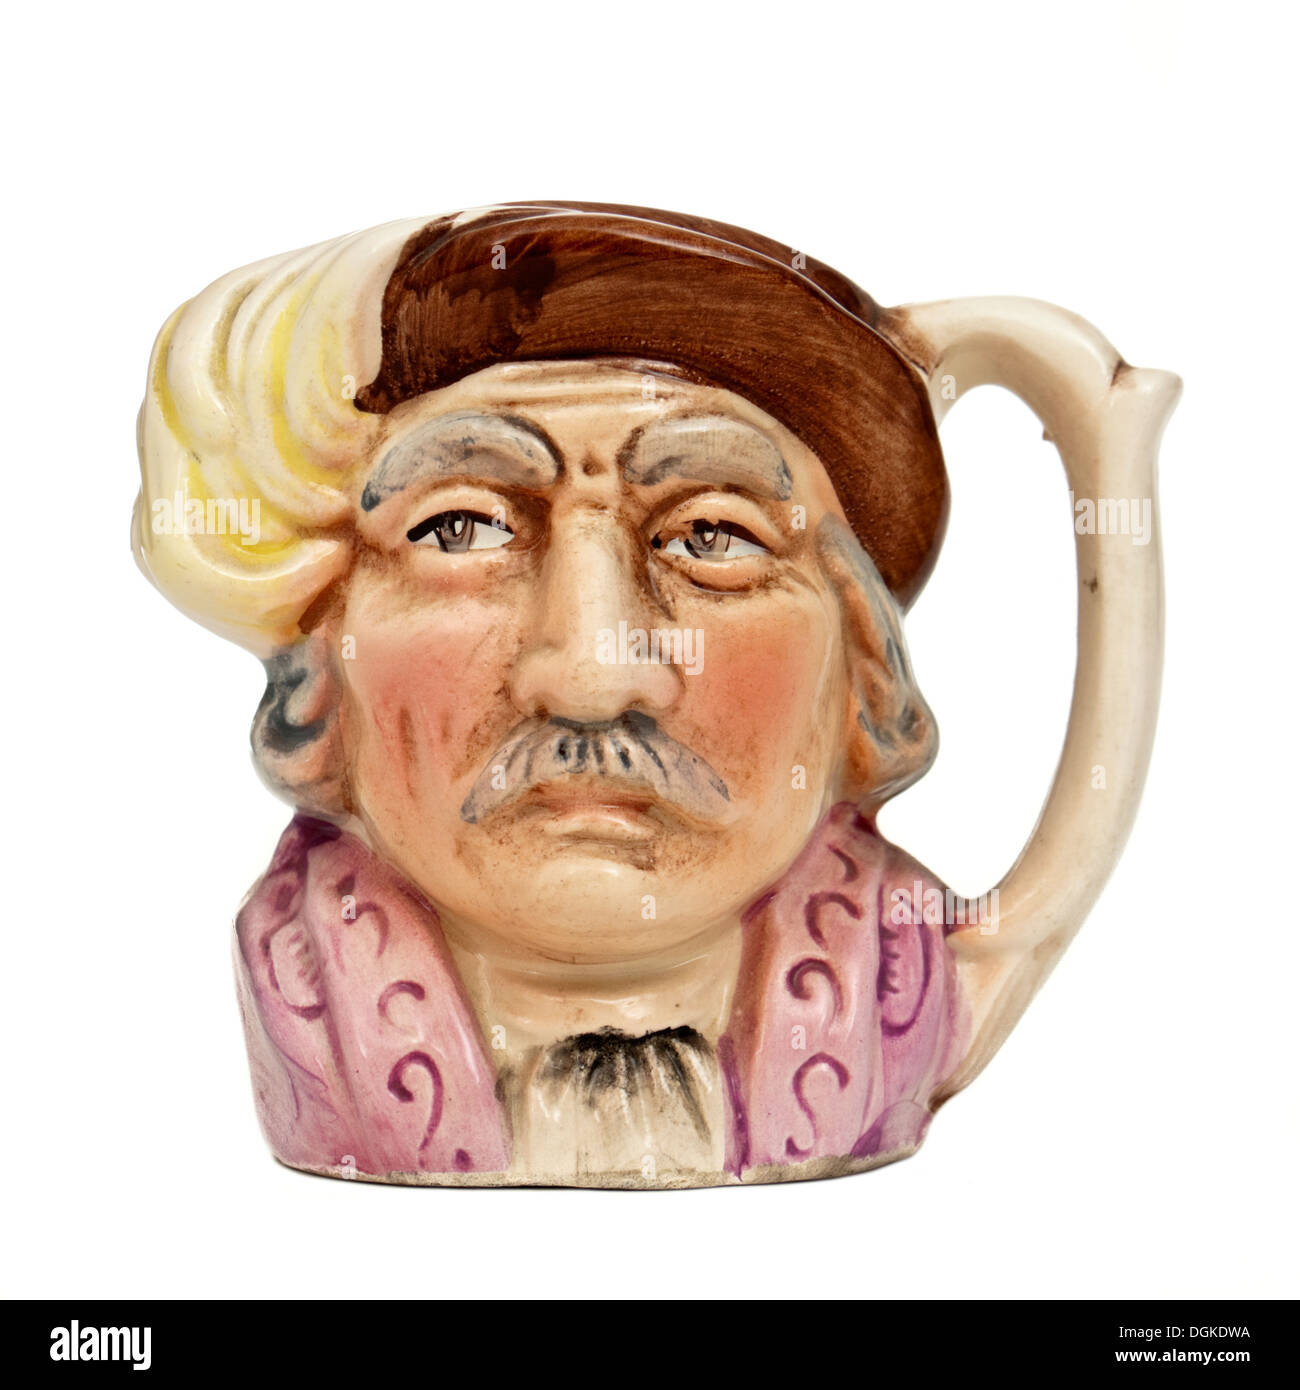 Staffordshire character / Toby jug by Shorter & Son Ltd from the 1950's Stock Photo